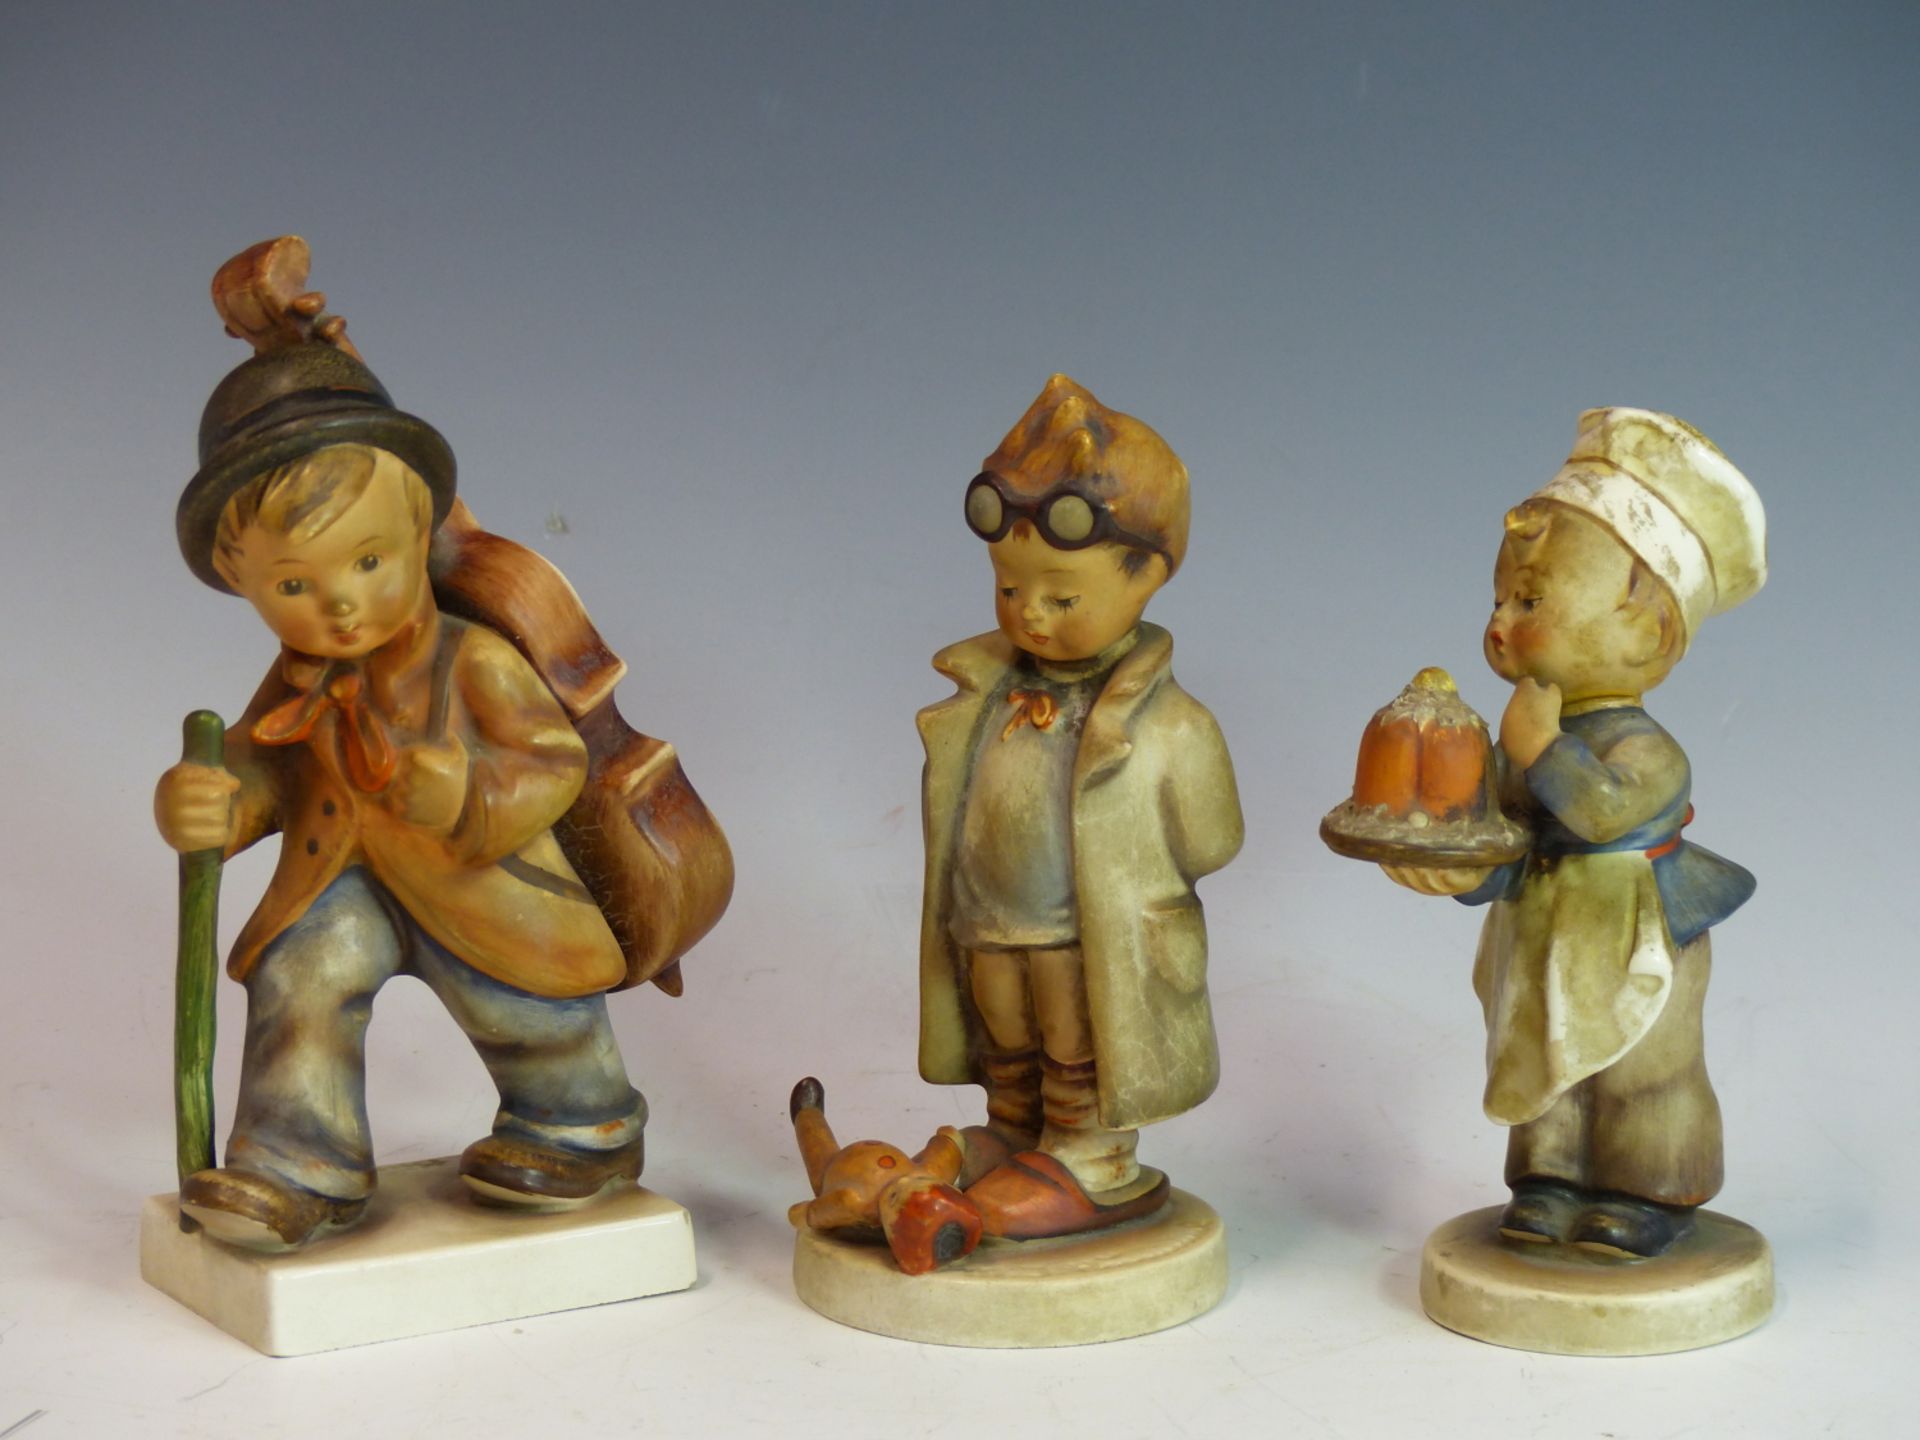 THREE M HUMMELL FIGURINES, A YOUNG CHEF WITH CAKE, A BOY WITH DOLL AT HIS FEET & A YOUNG MUSICIAN